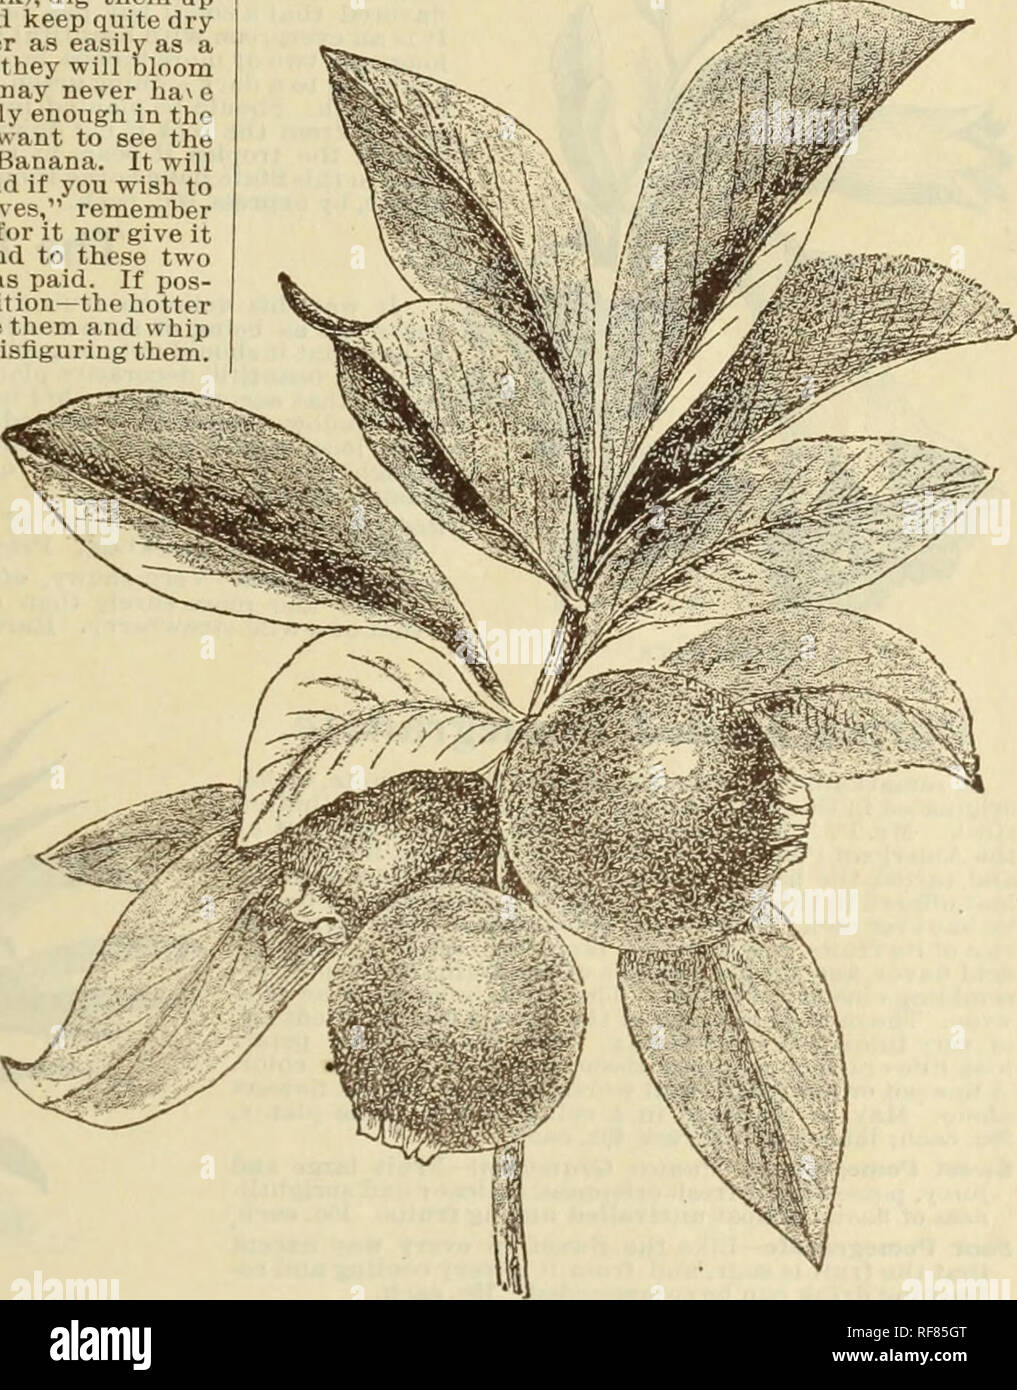 . Catalogue of rare Florida flowers and fruits : season of 1894. Nurseries (Horticulture) Florida Catalogs; Flowers Catalogs; Plants, Ornamental Catalogs. CATALOGUE OF RARE FLORIDA FLOWERS AND FRUITS FOR 1894. 63 Achras Sapota. The Sapodilla or Naseberry, of spreading form, witli thick, glossy leaves. The fruit can be compared to a russet apple, witli taste of a rich, sweet, juicy pear, with granulated pulp; almost equal to the Mango, and the taste does not have to be acquired. Very choice and rare. Price, 30c. each. Anona Squamosa. Sugar Apple, or Sweet SopâA most delicious fruit re- semblint Stock Photo